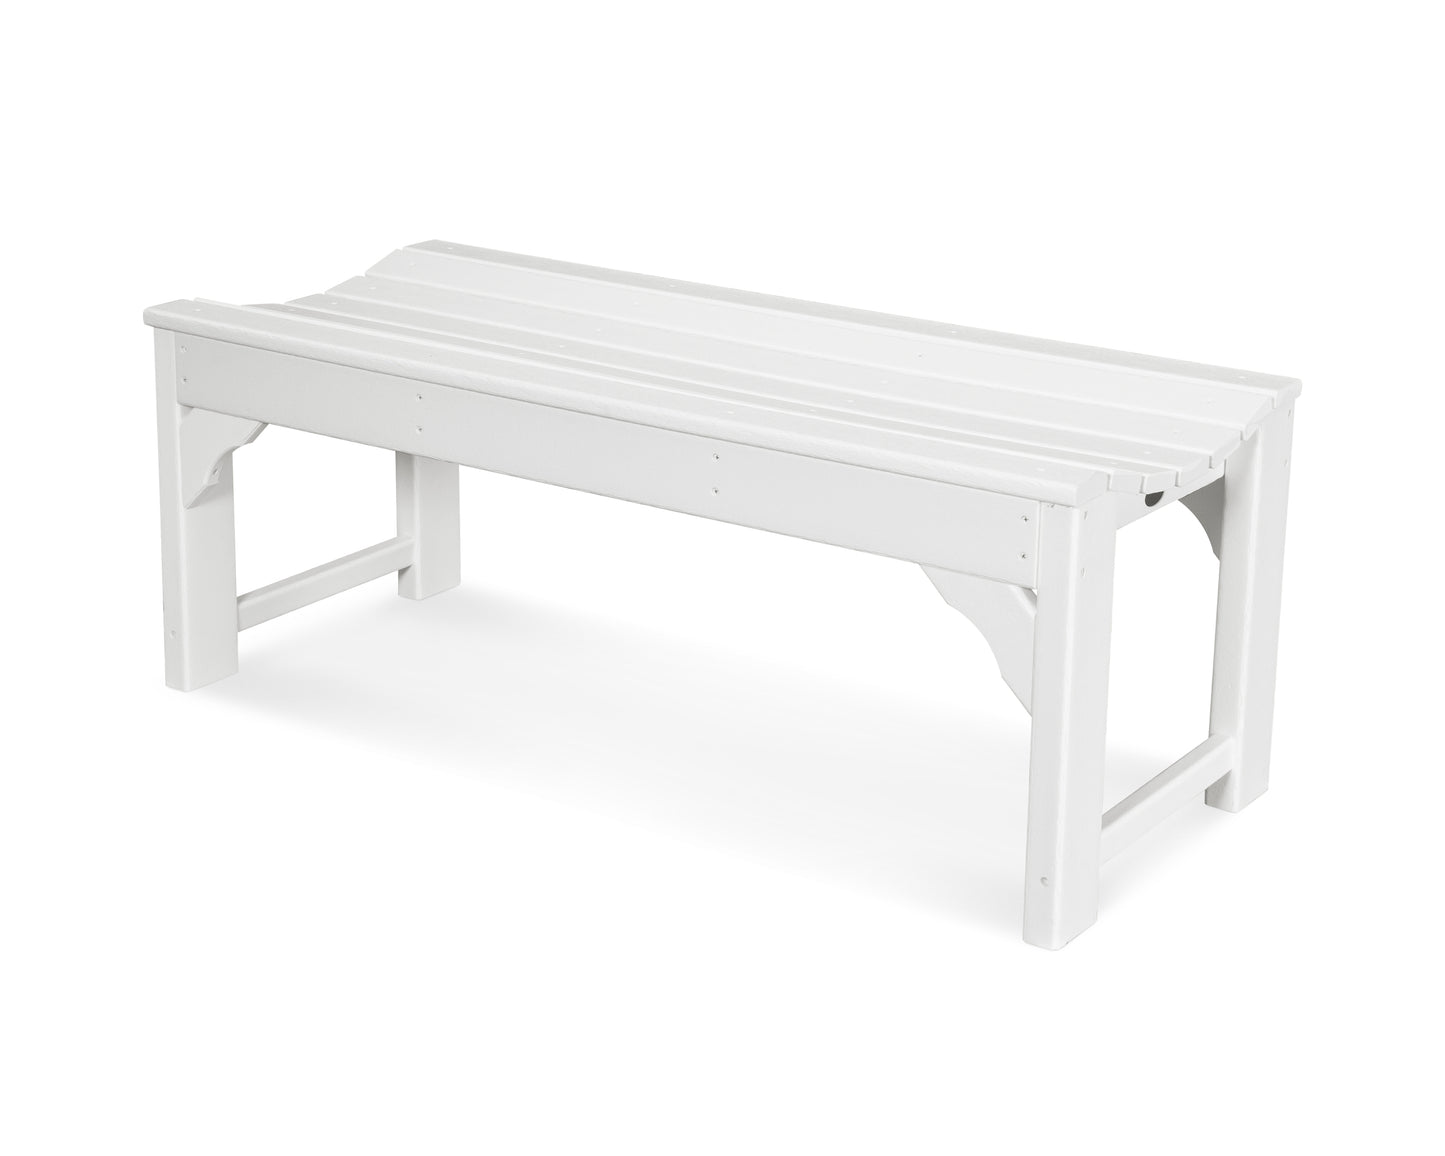 Traditional Garden 48" Backless Bench